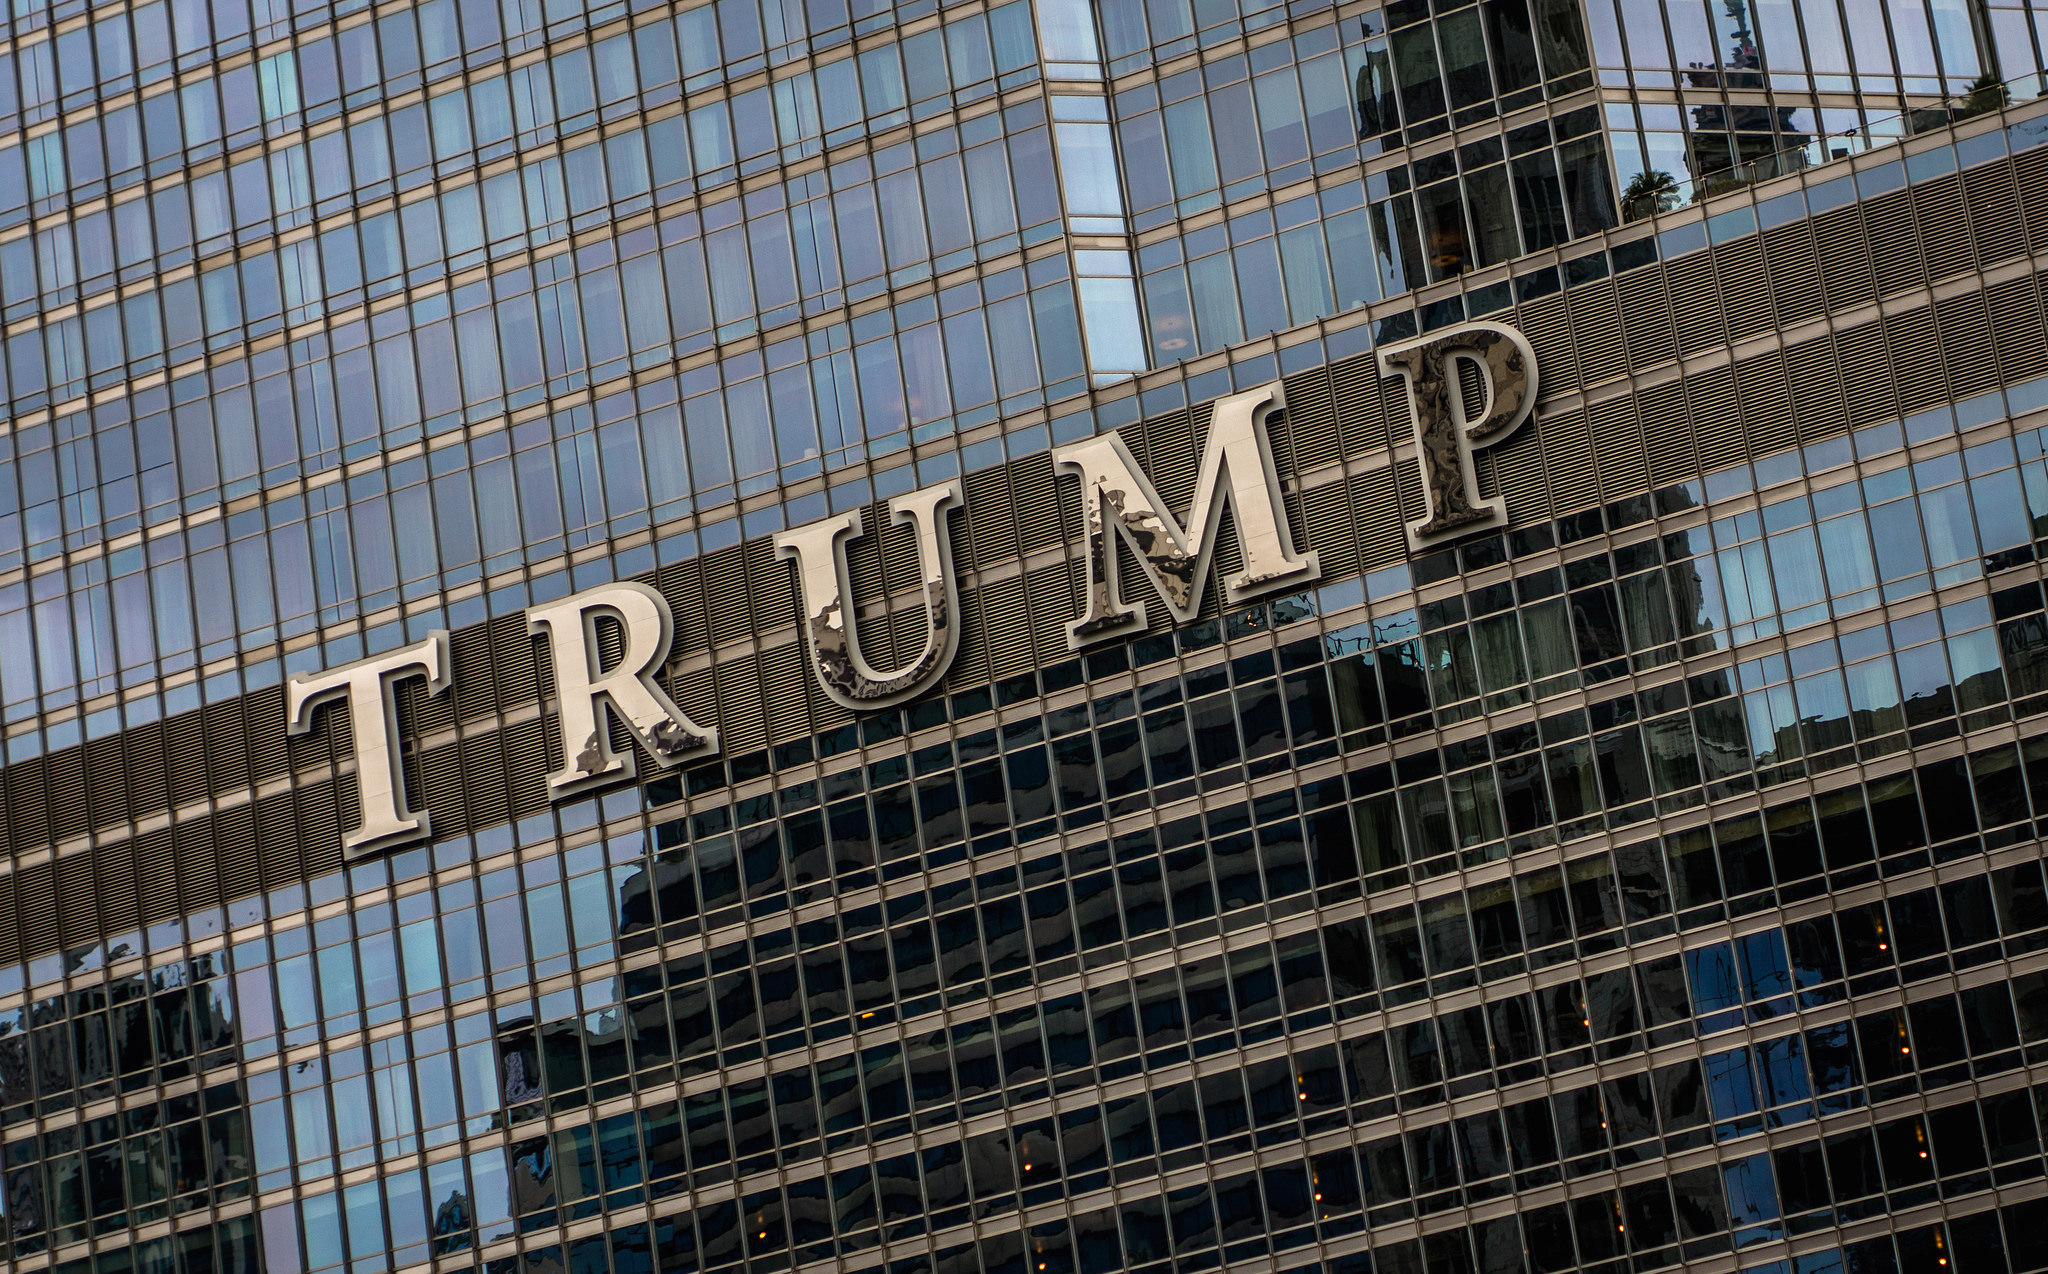 Trump Tower in Chicago. (Photo credit: Guillaume Flament/Flickr)